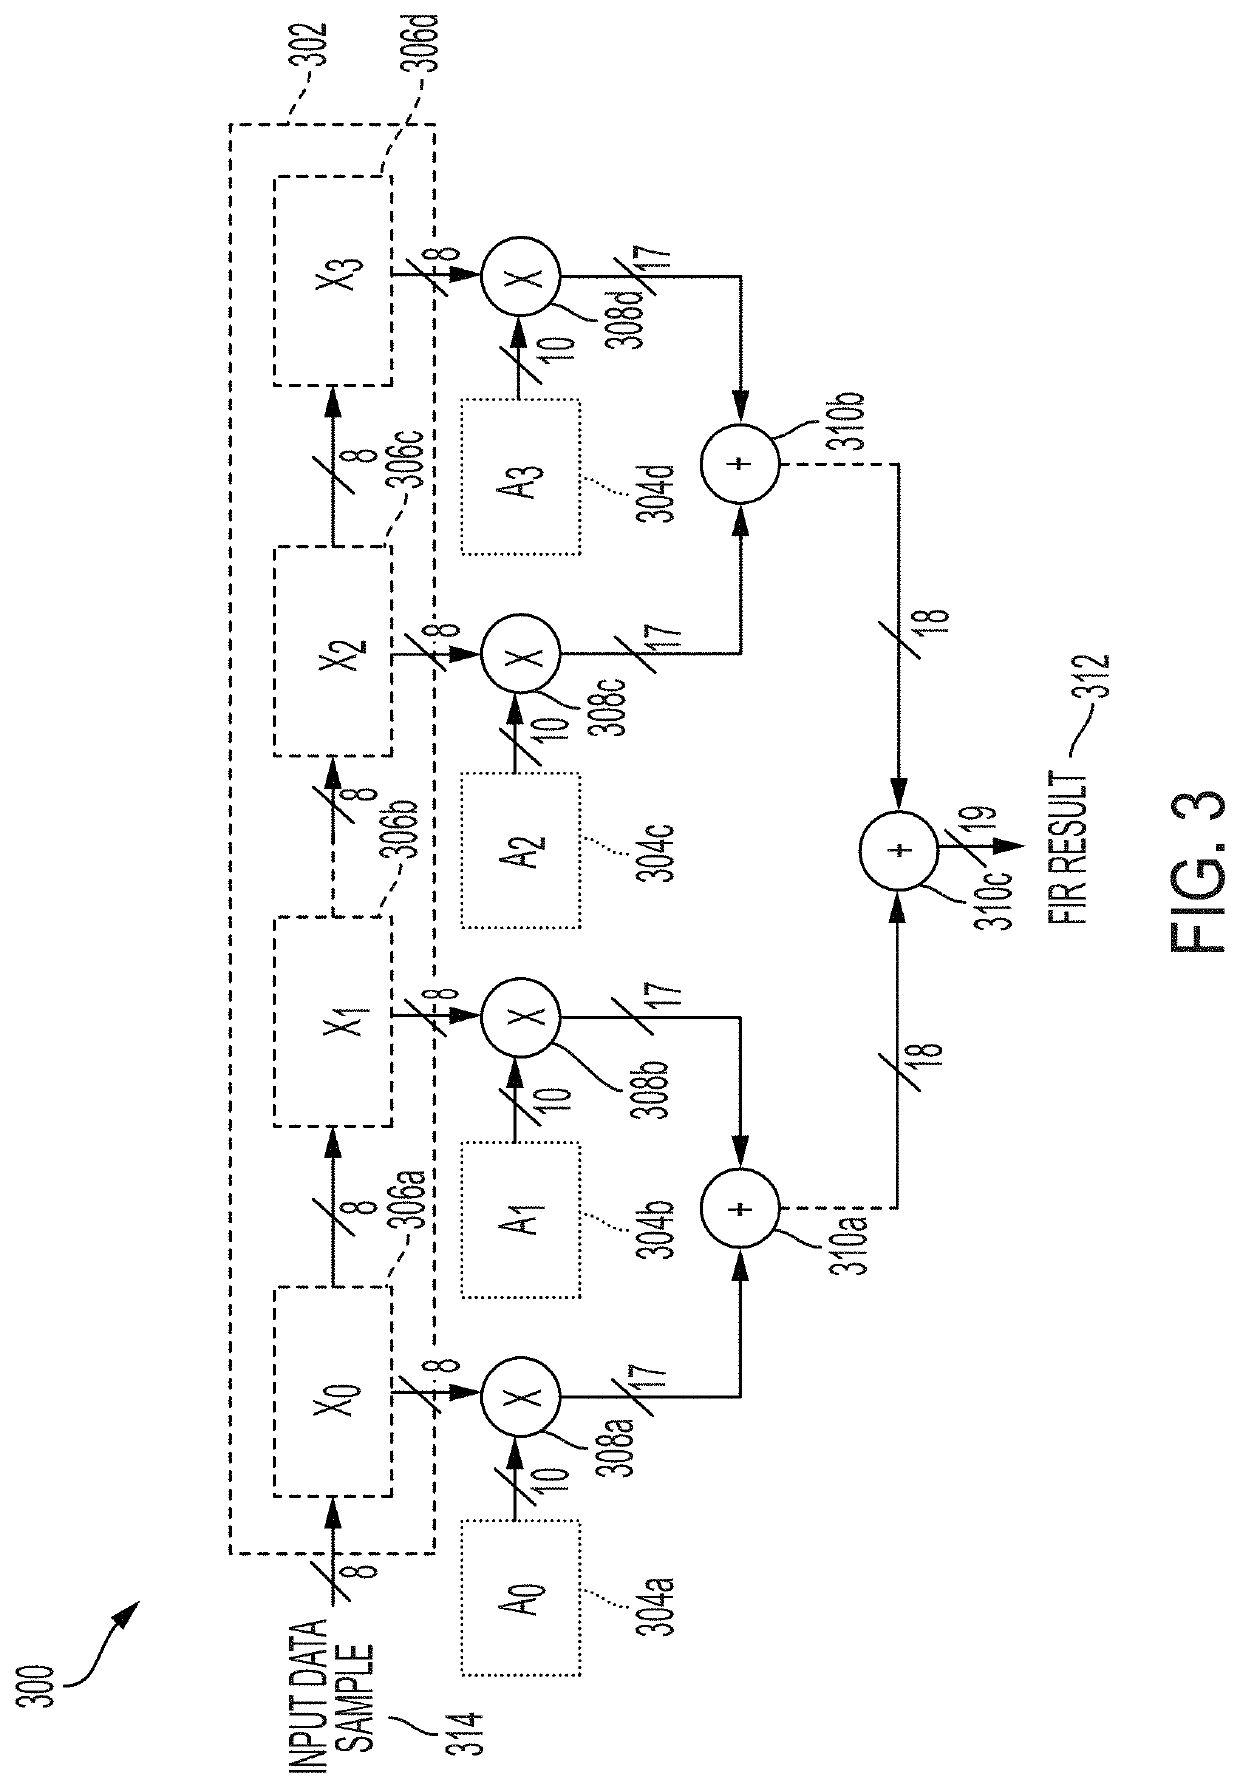 Systems and method for a low power correlator architecture using distributed arithmetic